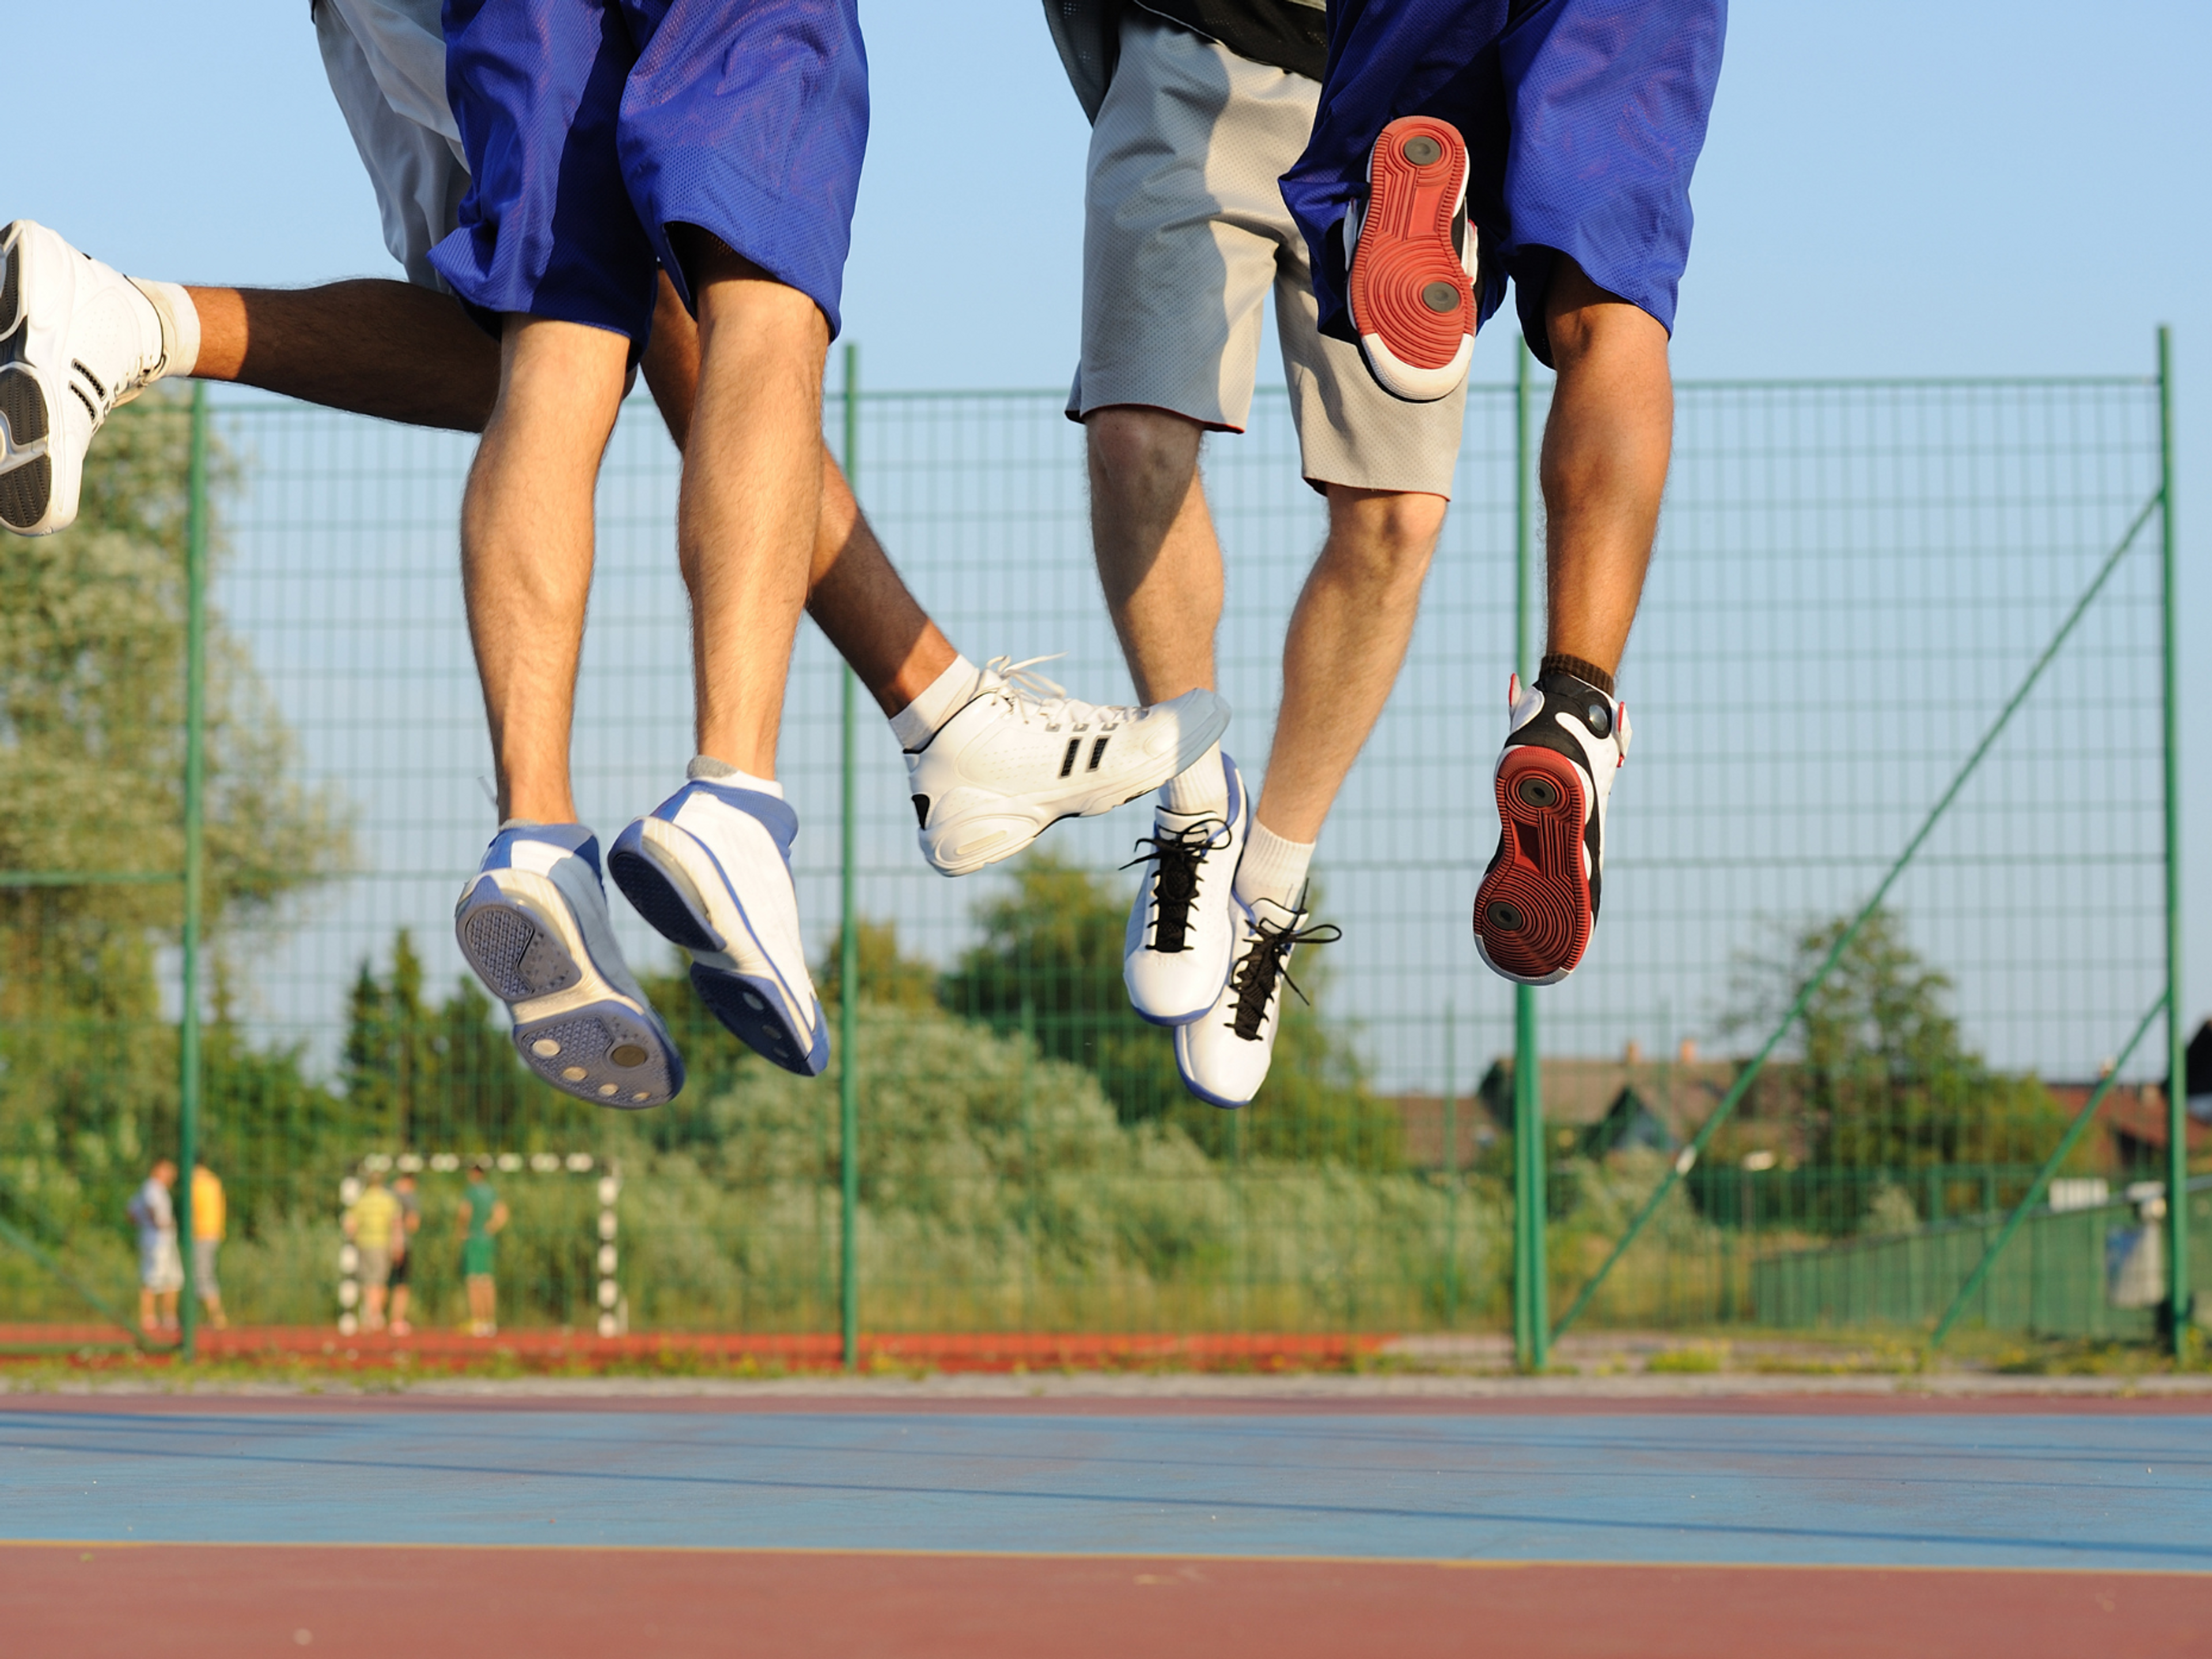 Avoid all running and jumping activities until the final stages of your calf strain recovery.